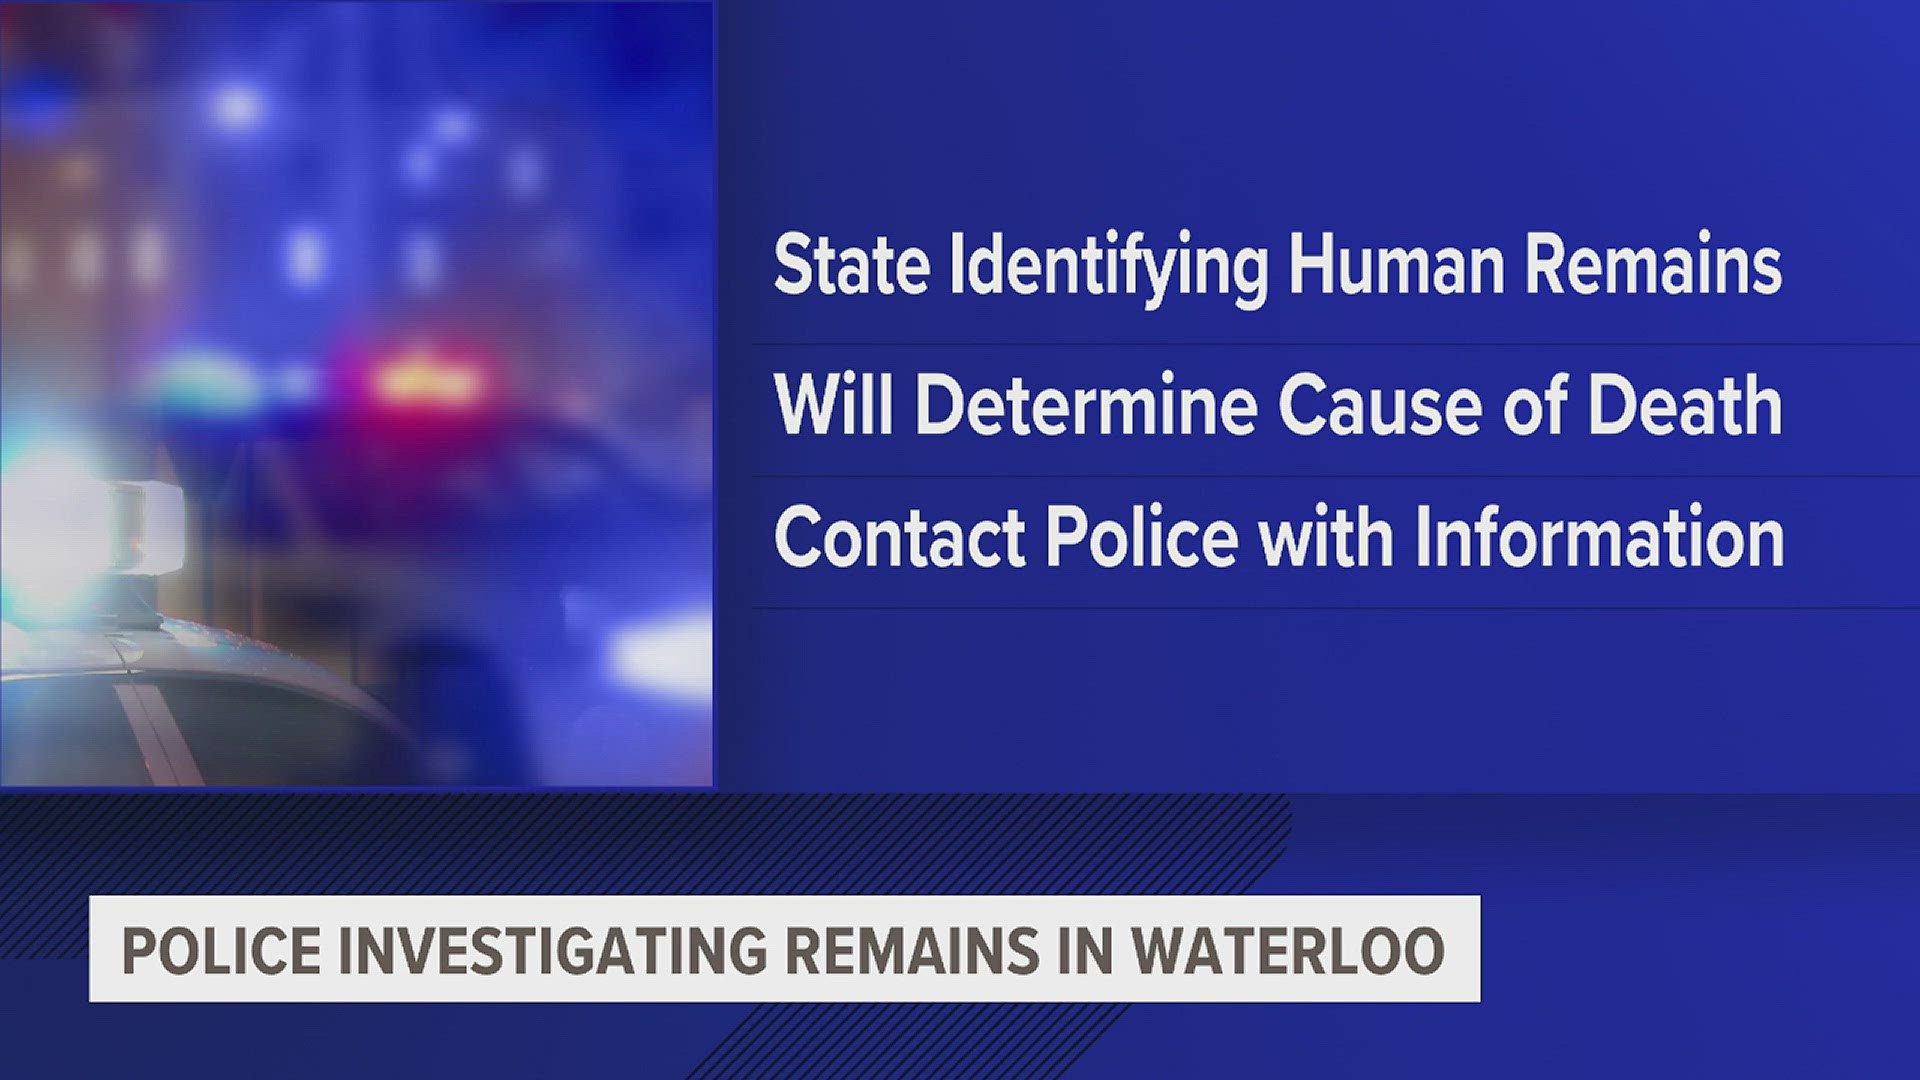 Human remains were discovered at the Waterloo Waste Treatment Plant. The Iowa Medical Examiner's office is working to determine an identity and cause of death.